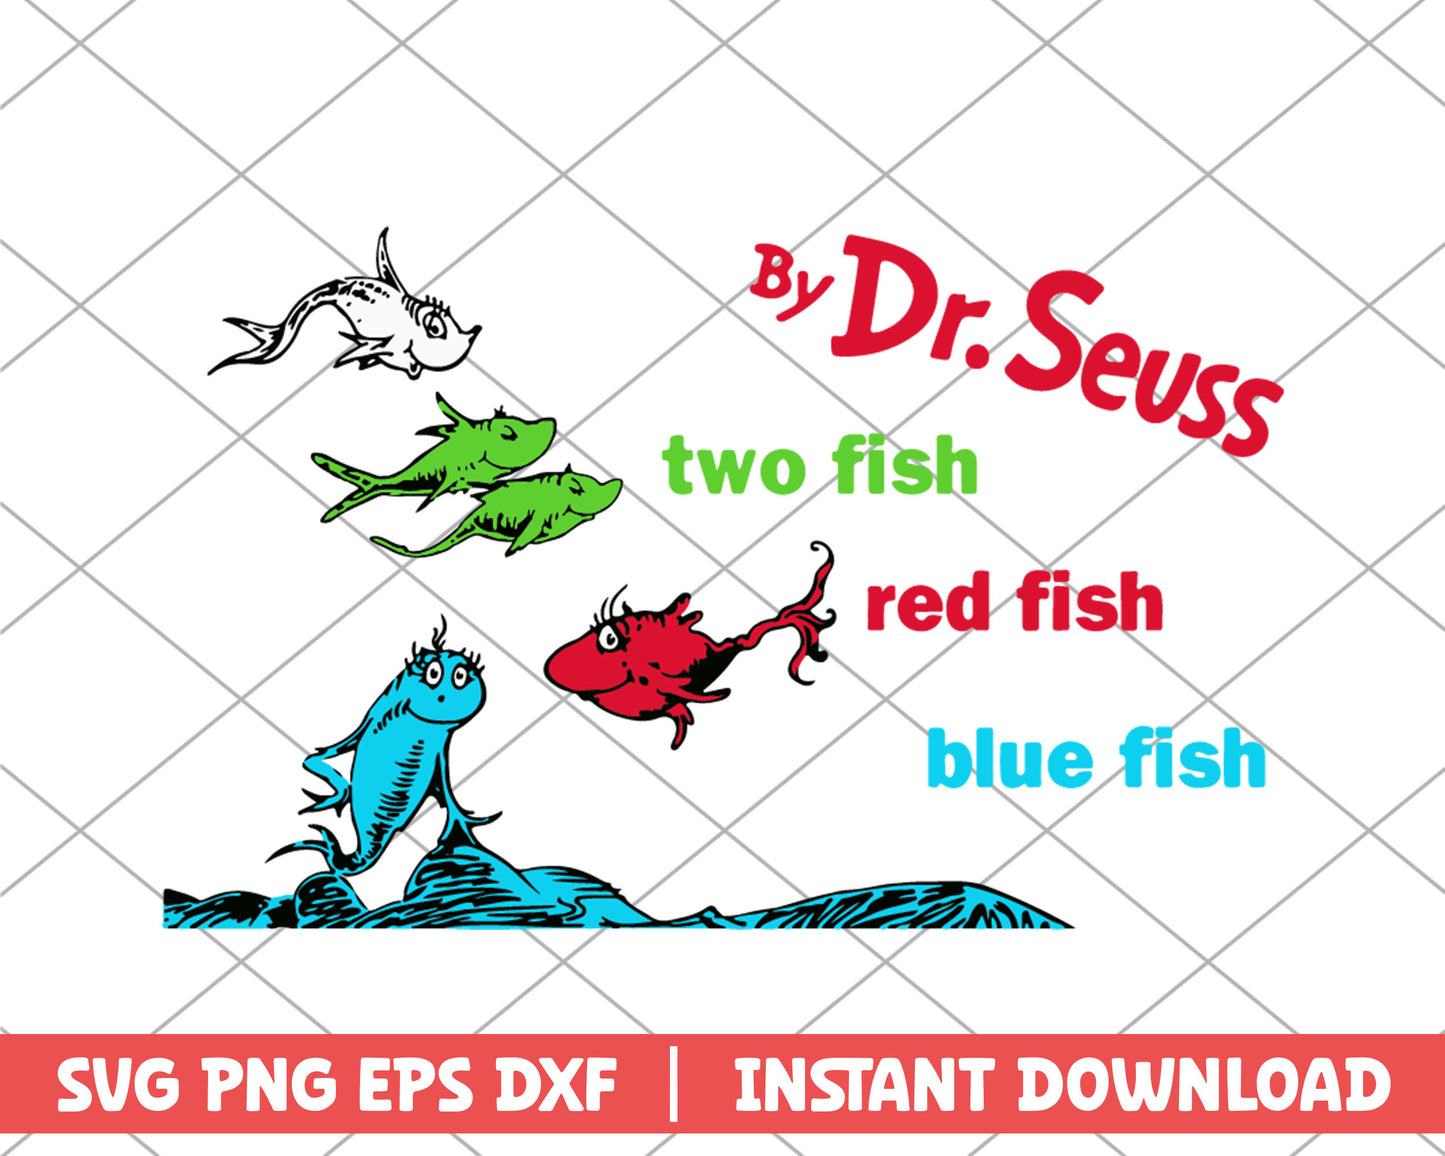 By dr.seuss two fish red fish blue fish svg 